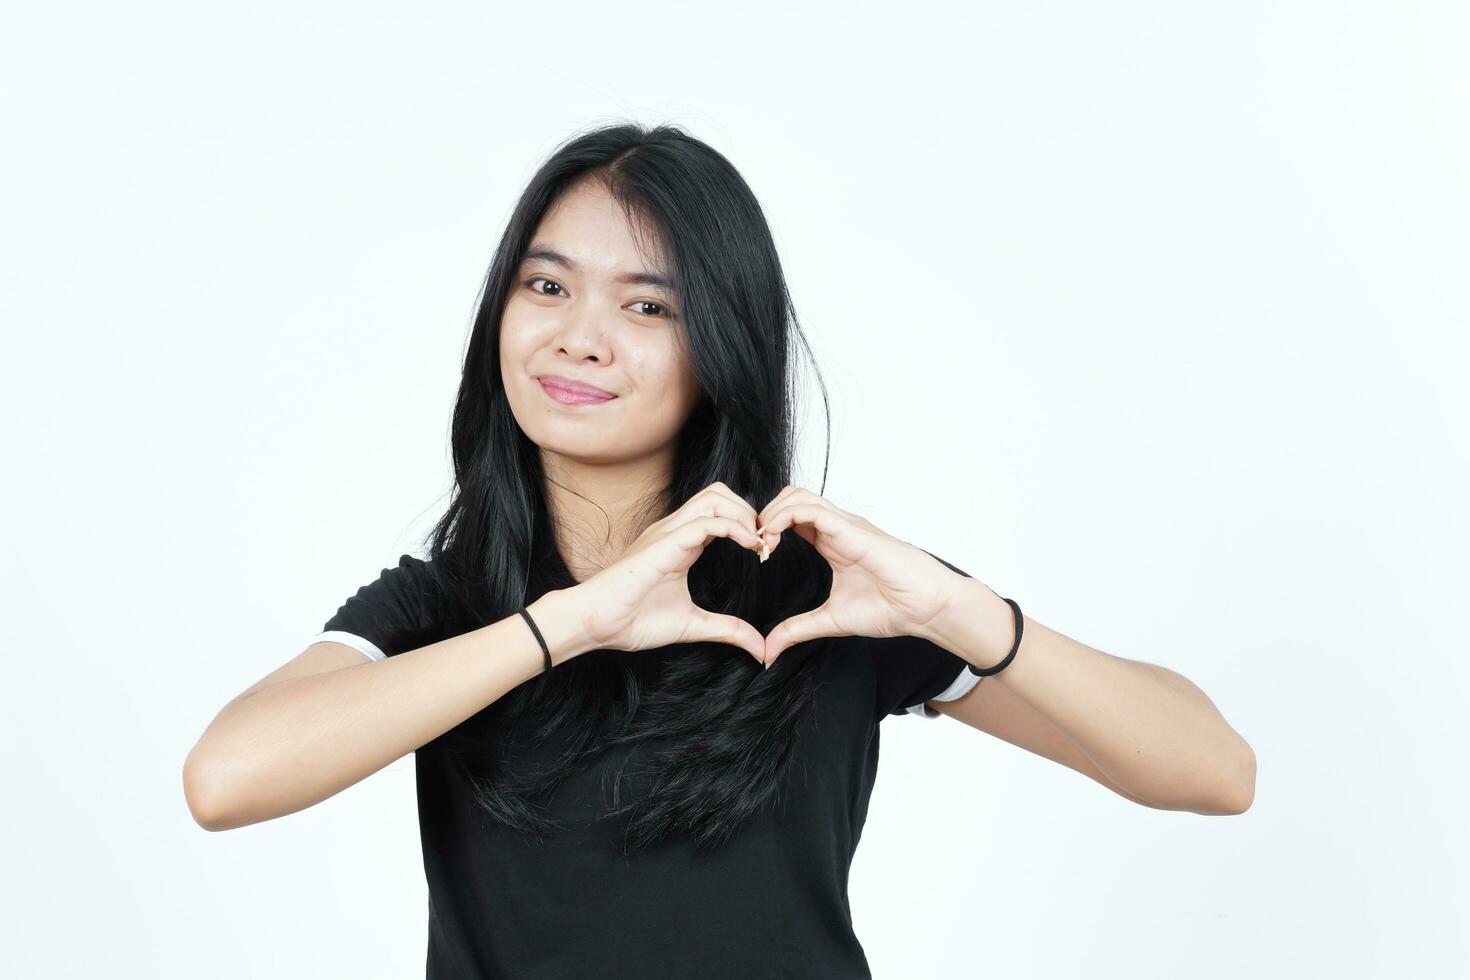 Showing Love Heart Sign Of Beautiful Asian Woman Isolated On White Background photo